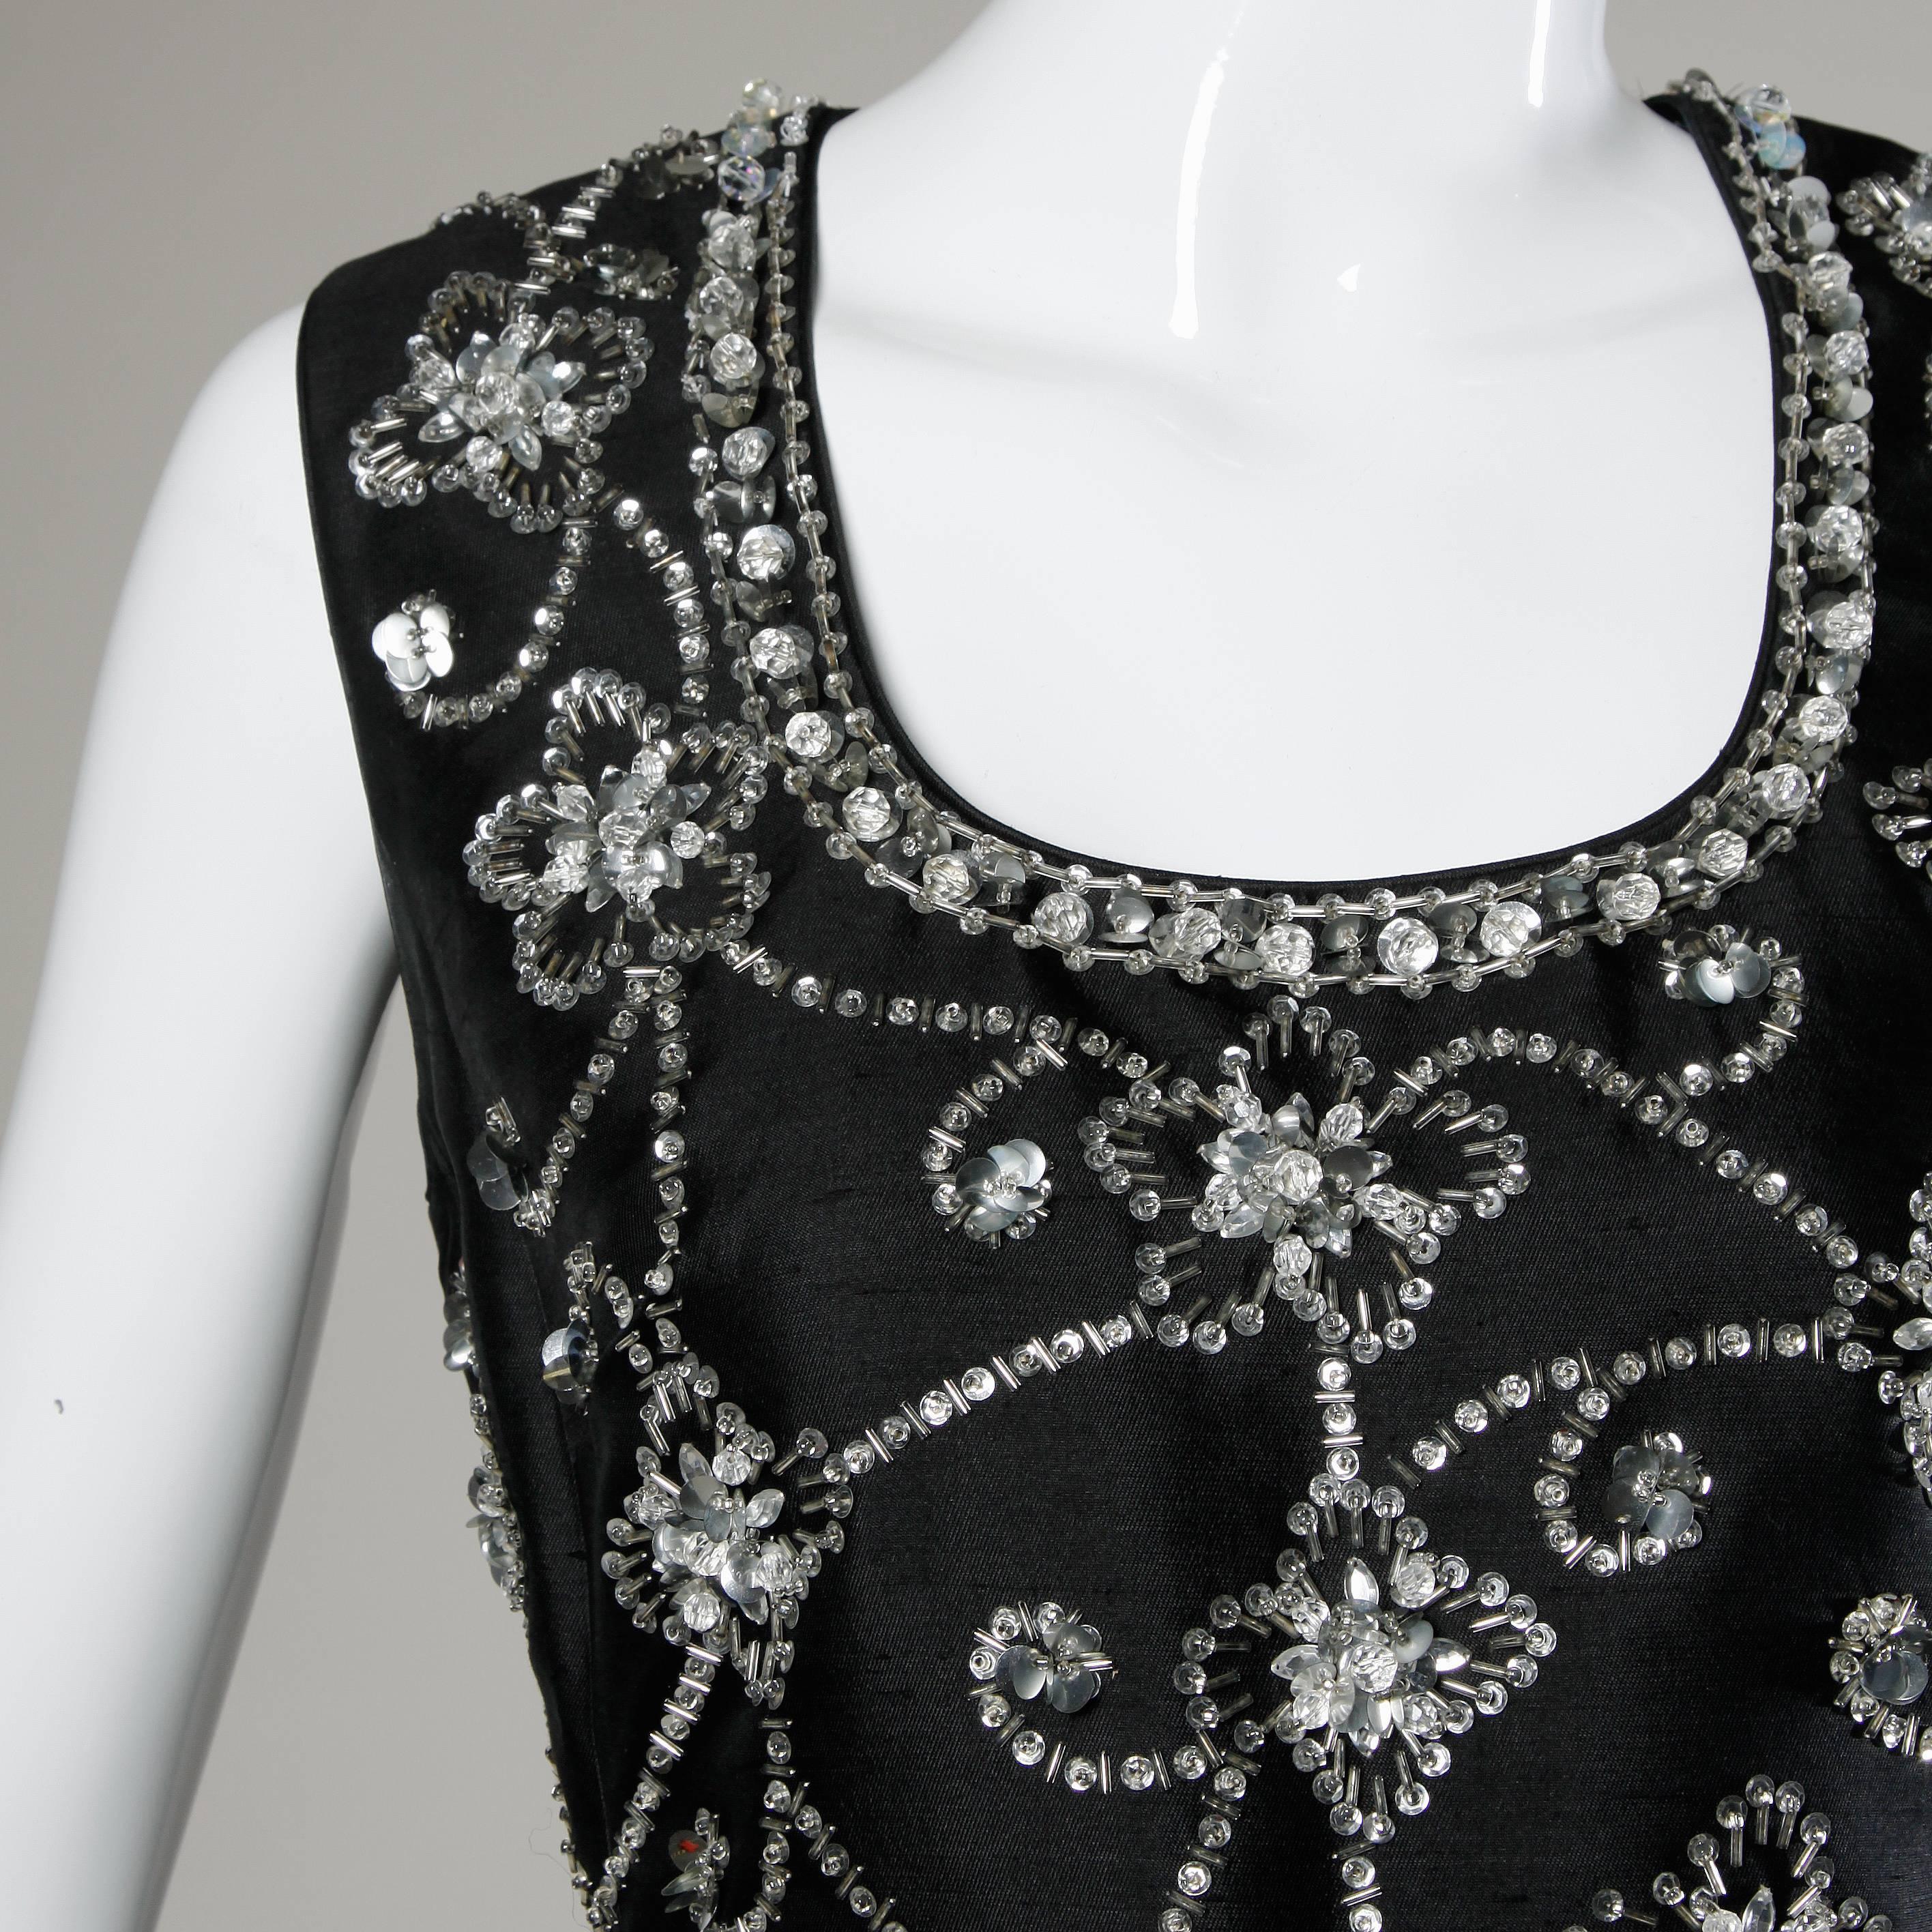 Gorgeous vintage silk and wool maxi dress with rhinestones, beads and sequins. All hand finished! Made in the British Crown Colony of Hong Kong.

Details:

Fully Lined
Back Metal Zip and Hook Closure
Marked Size: US 14
Estimated Size: M
Color: